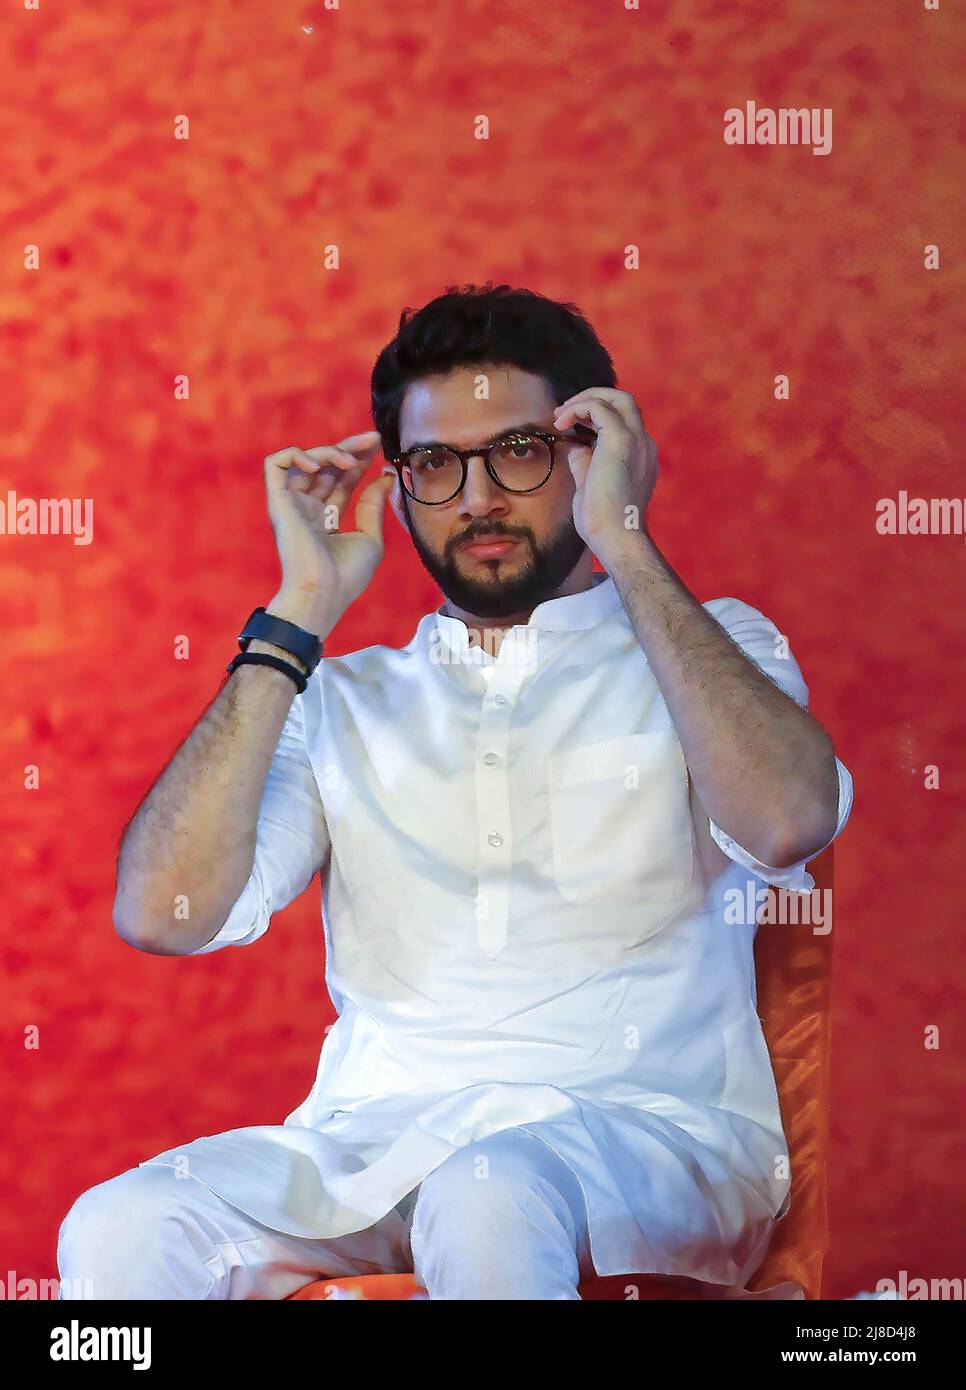 Cabinet Minister of Tourism and Environment (Maharashtra), Aditya Thackeray adjust his spectacles during the Shiv Sena rally. The rally marked the beginning of the party's second phase of 'Shiv Sampark Abhiyan' party's outreach programme with the voters and karyakartas (workers). Stock Photo